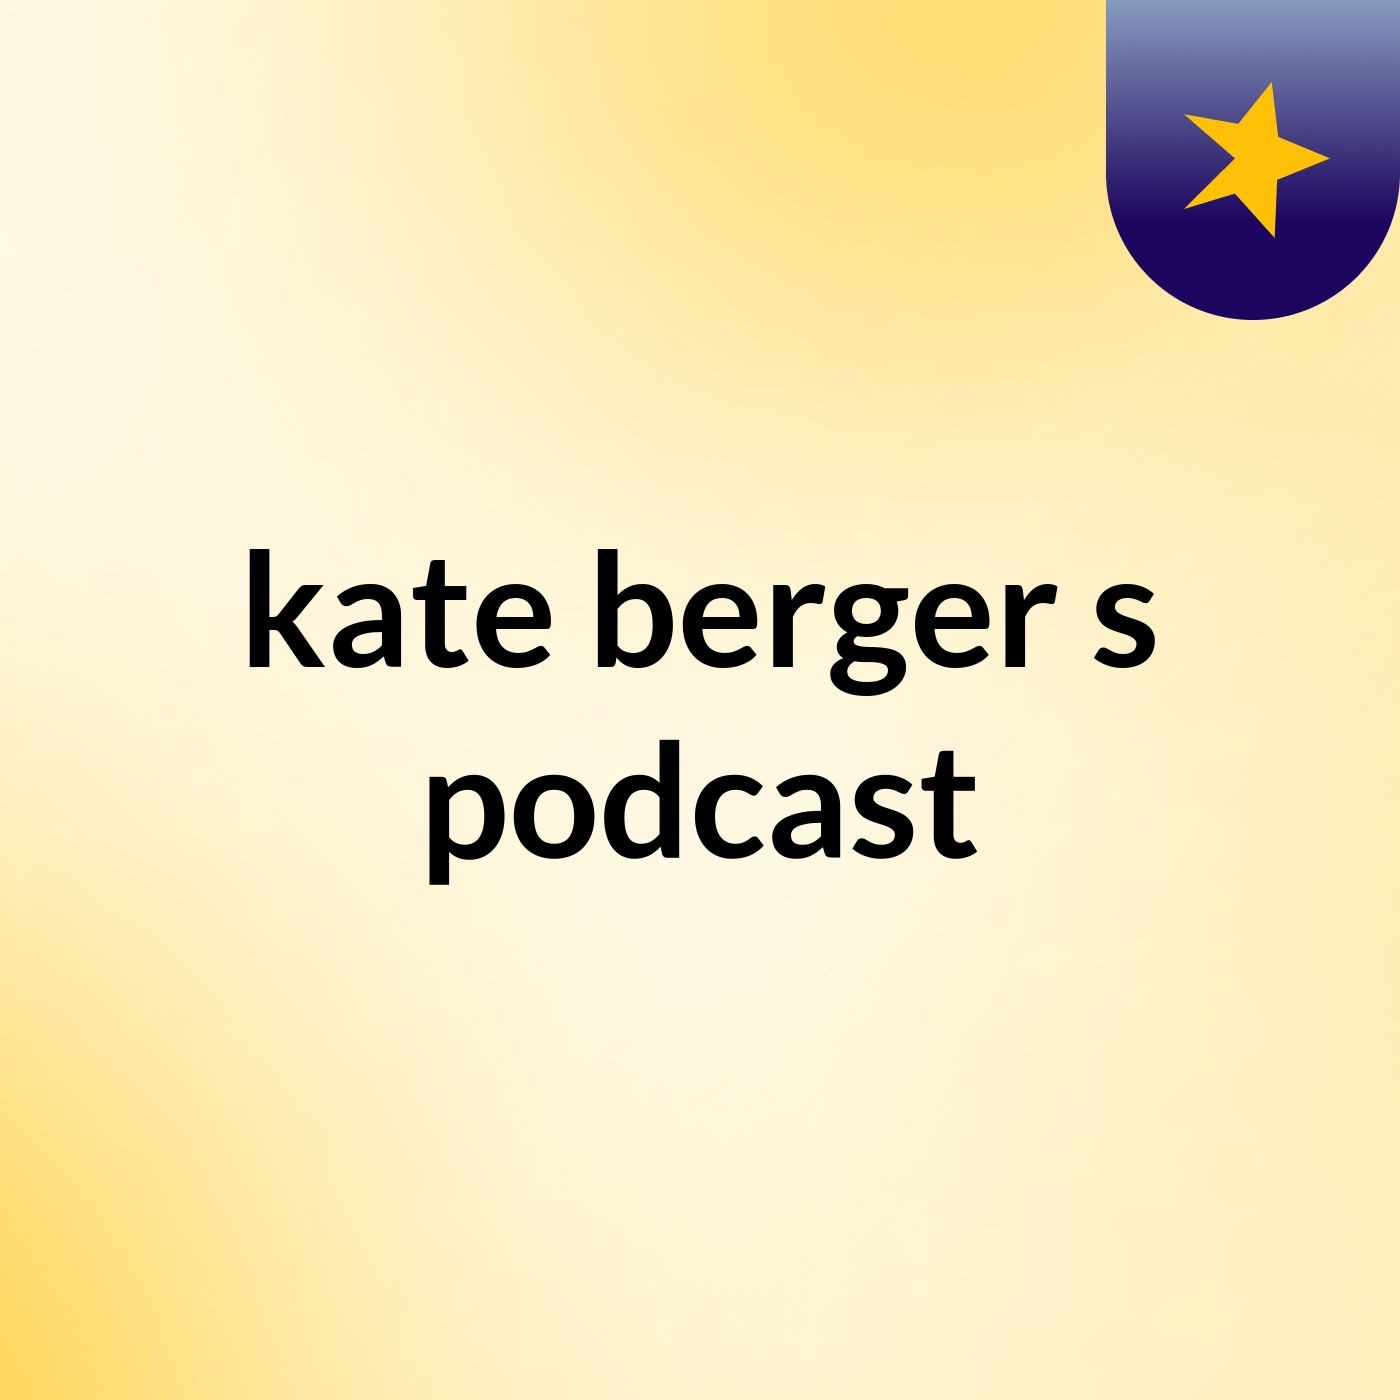 kate berger's podcast